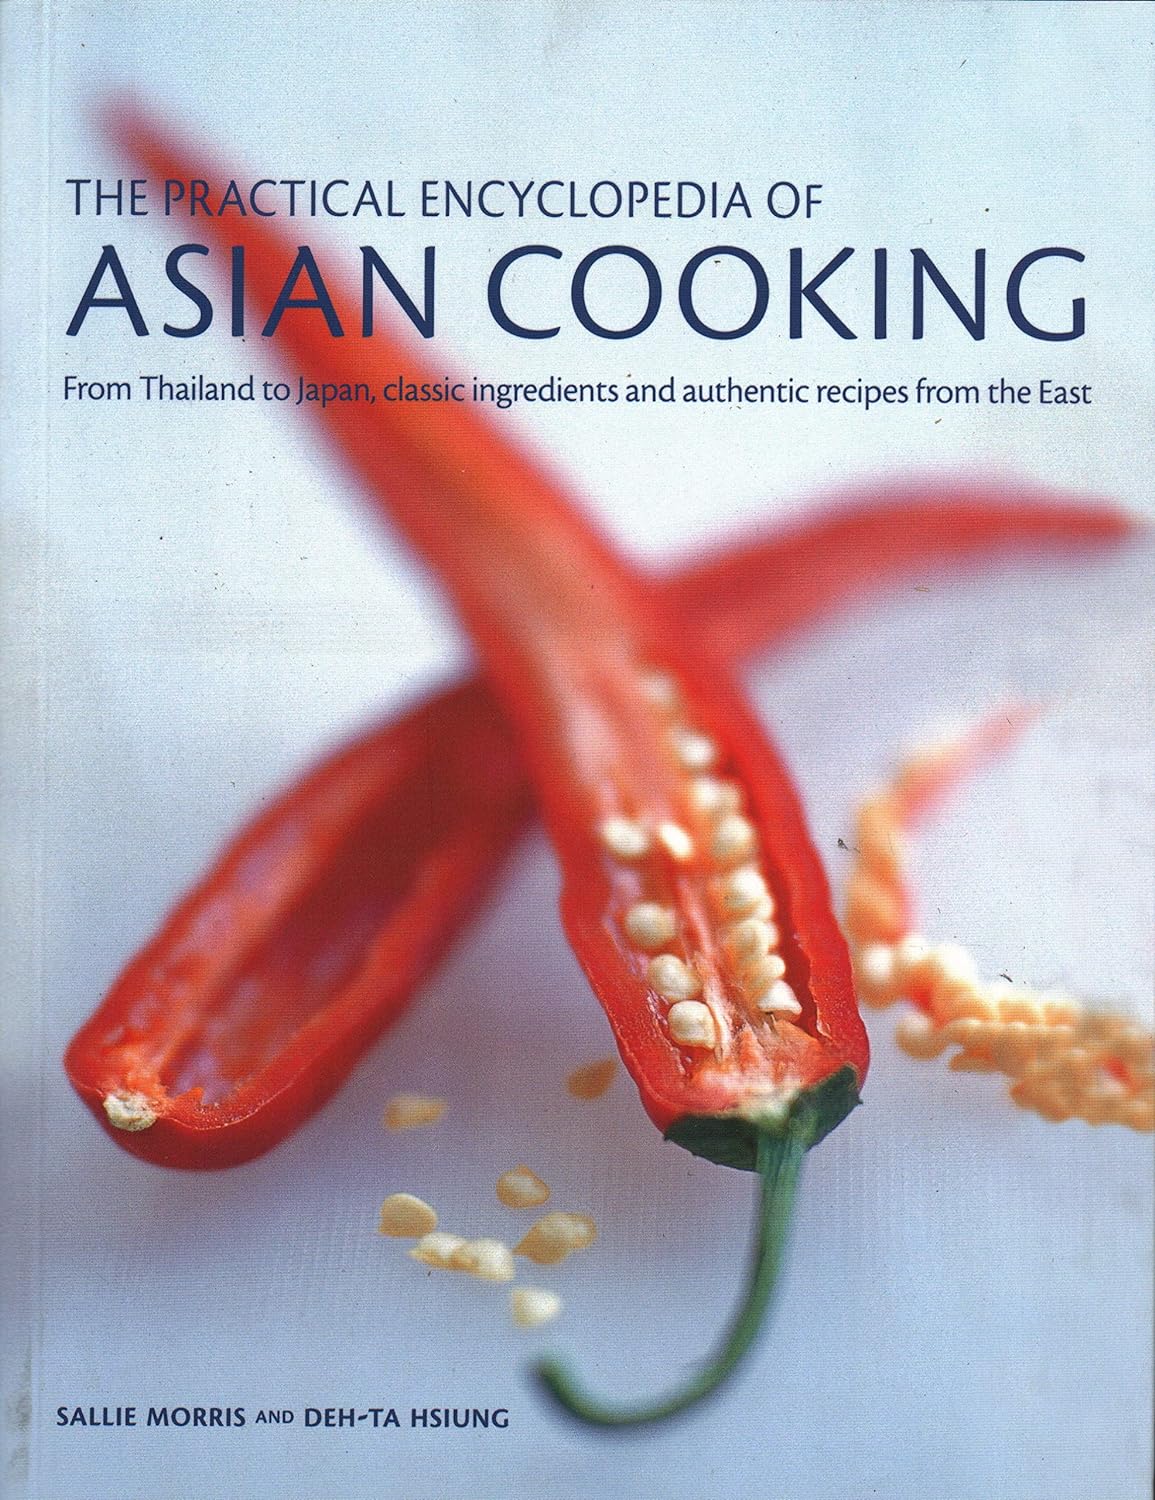 The Practical Encyclopedia of Asian Cooking